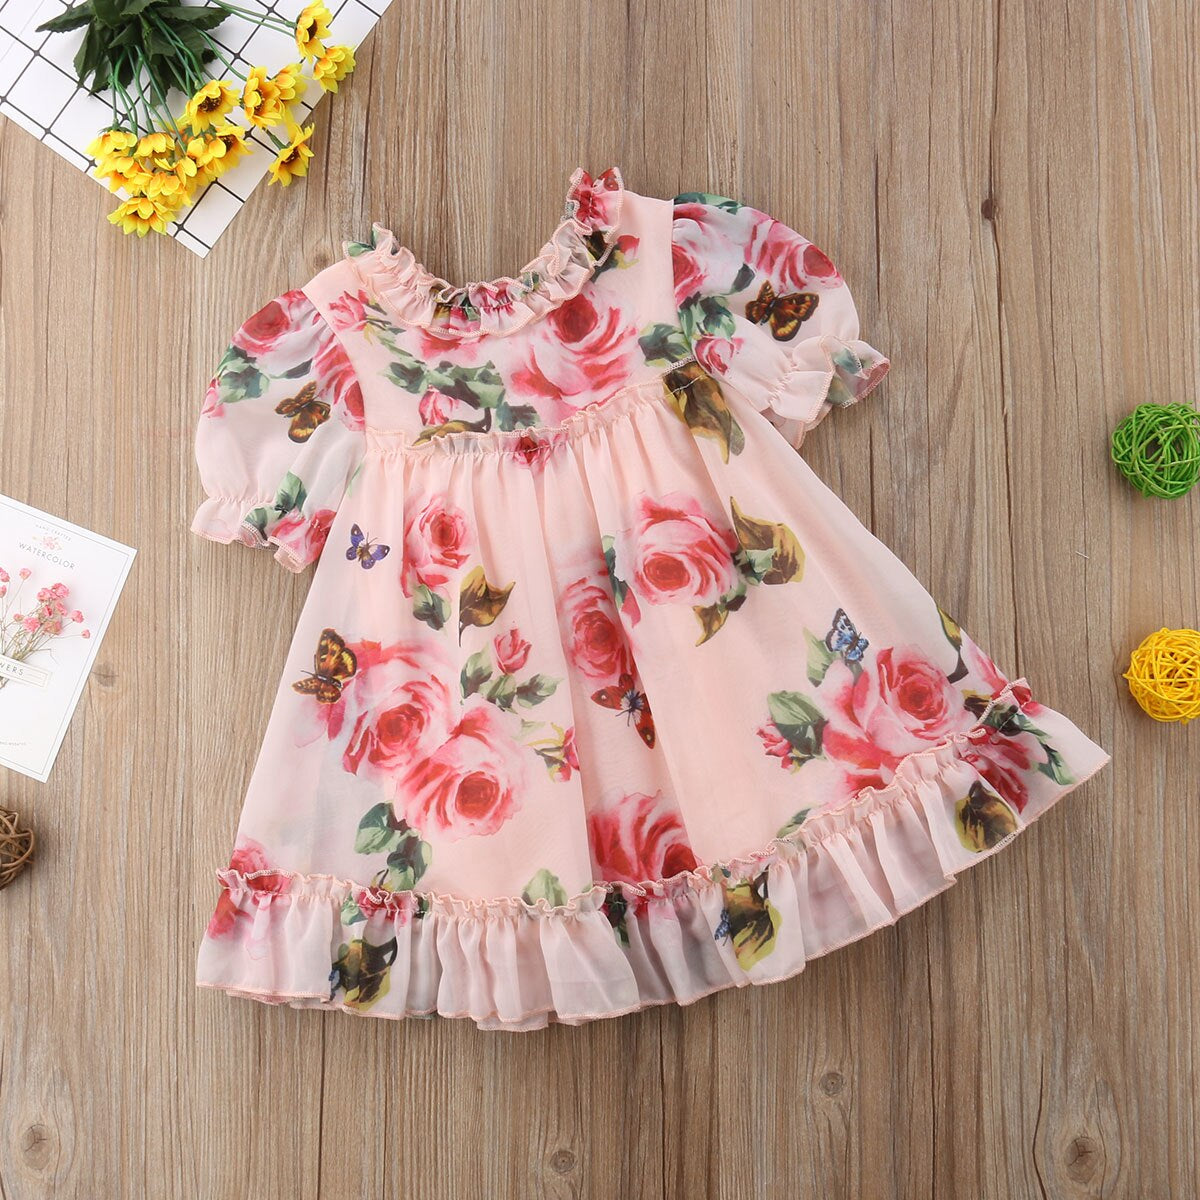 "Adorable Flower Puff Sleeve Dress for Baby Girls - Perfect for Holiday Parties and Special Occasions!"